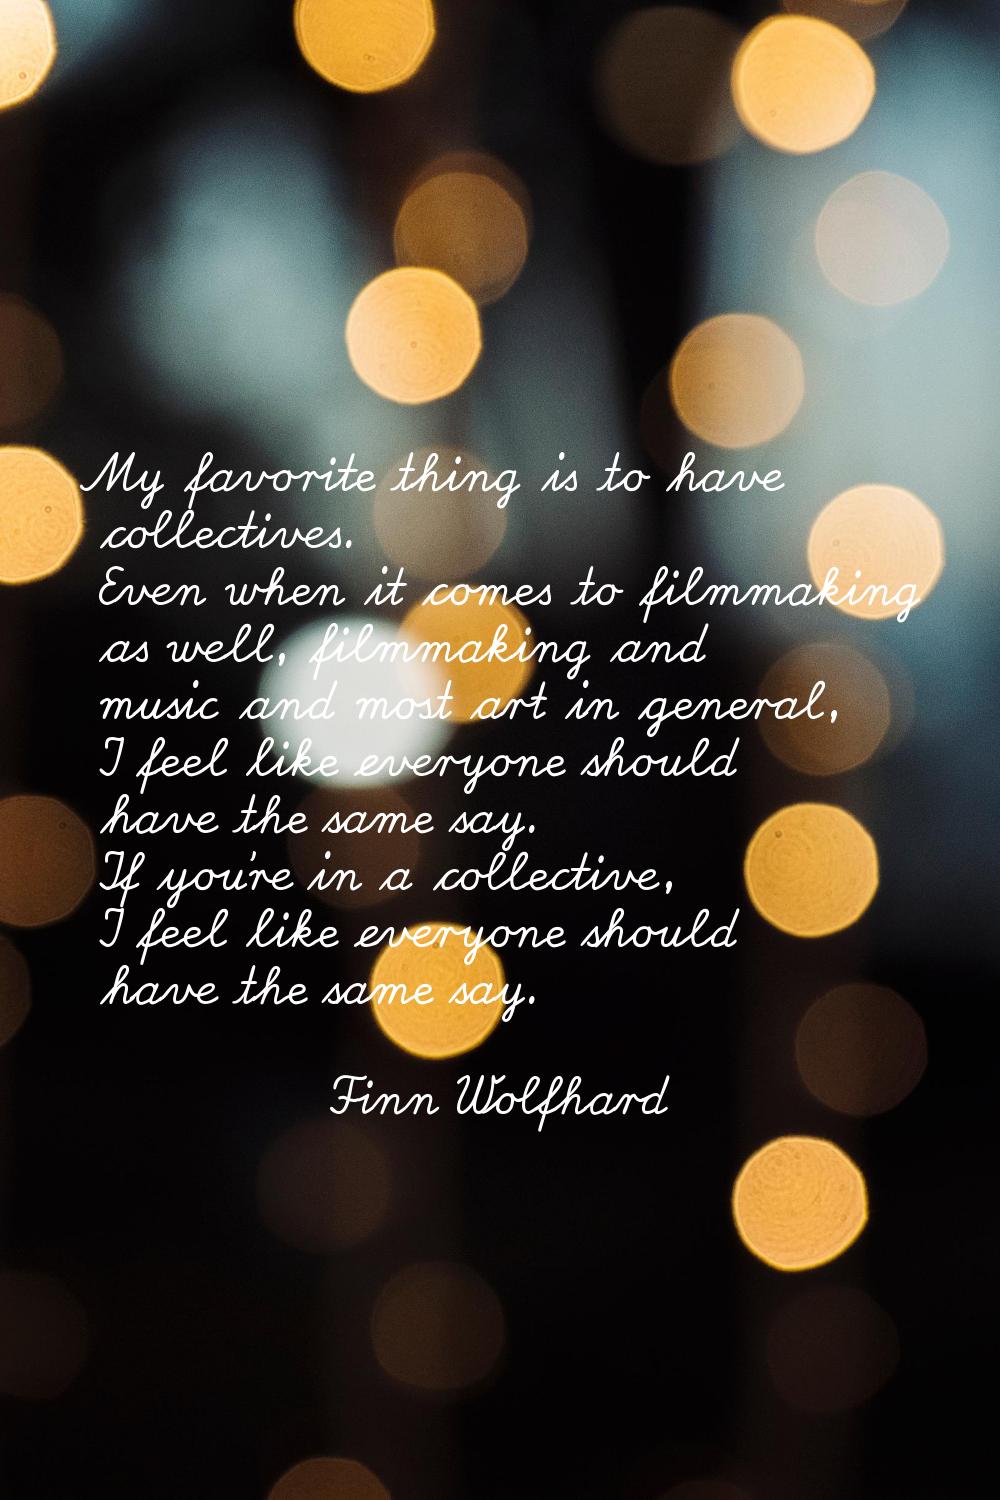 My favorite thing is to have collectives. Even when it comes to filmmaking as well, filmmaking and 